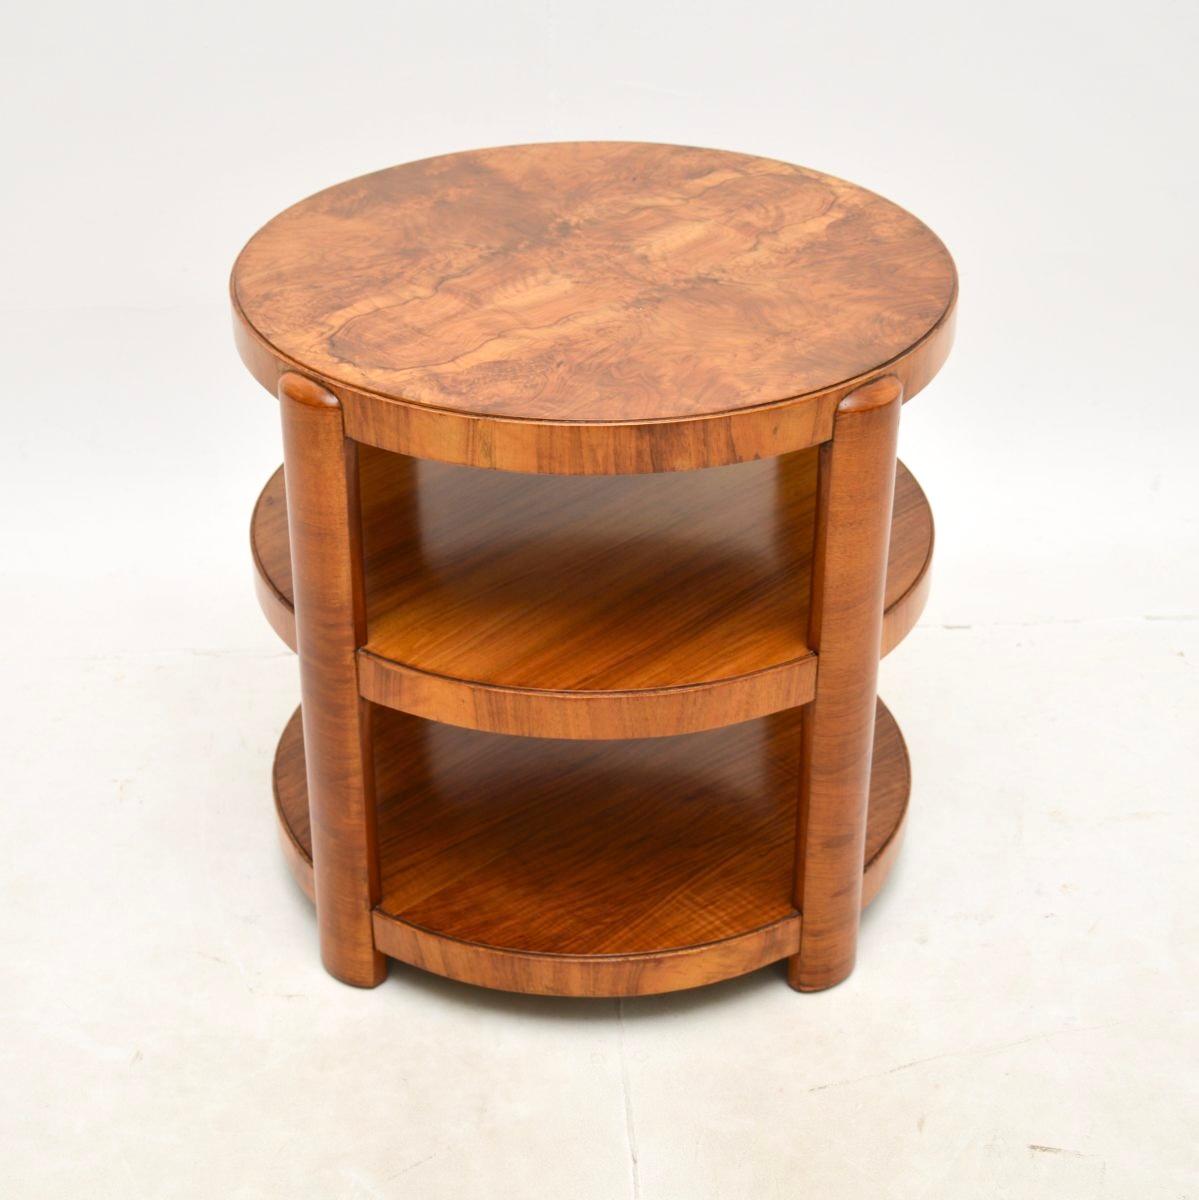 A stylish and extremely well made Art Deco walnut occasional side / coffee table. This was made in England, it dates from the 1920-30’s.

The quality is outstanding, this is beautifully crafted with a circular top, nicely moulded legs and an